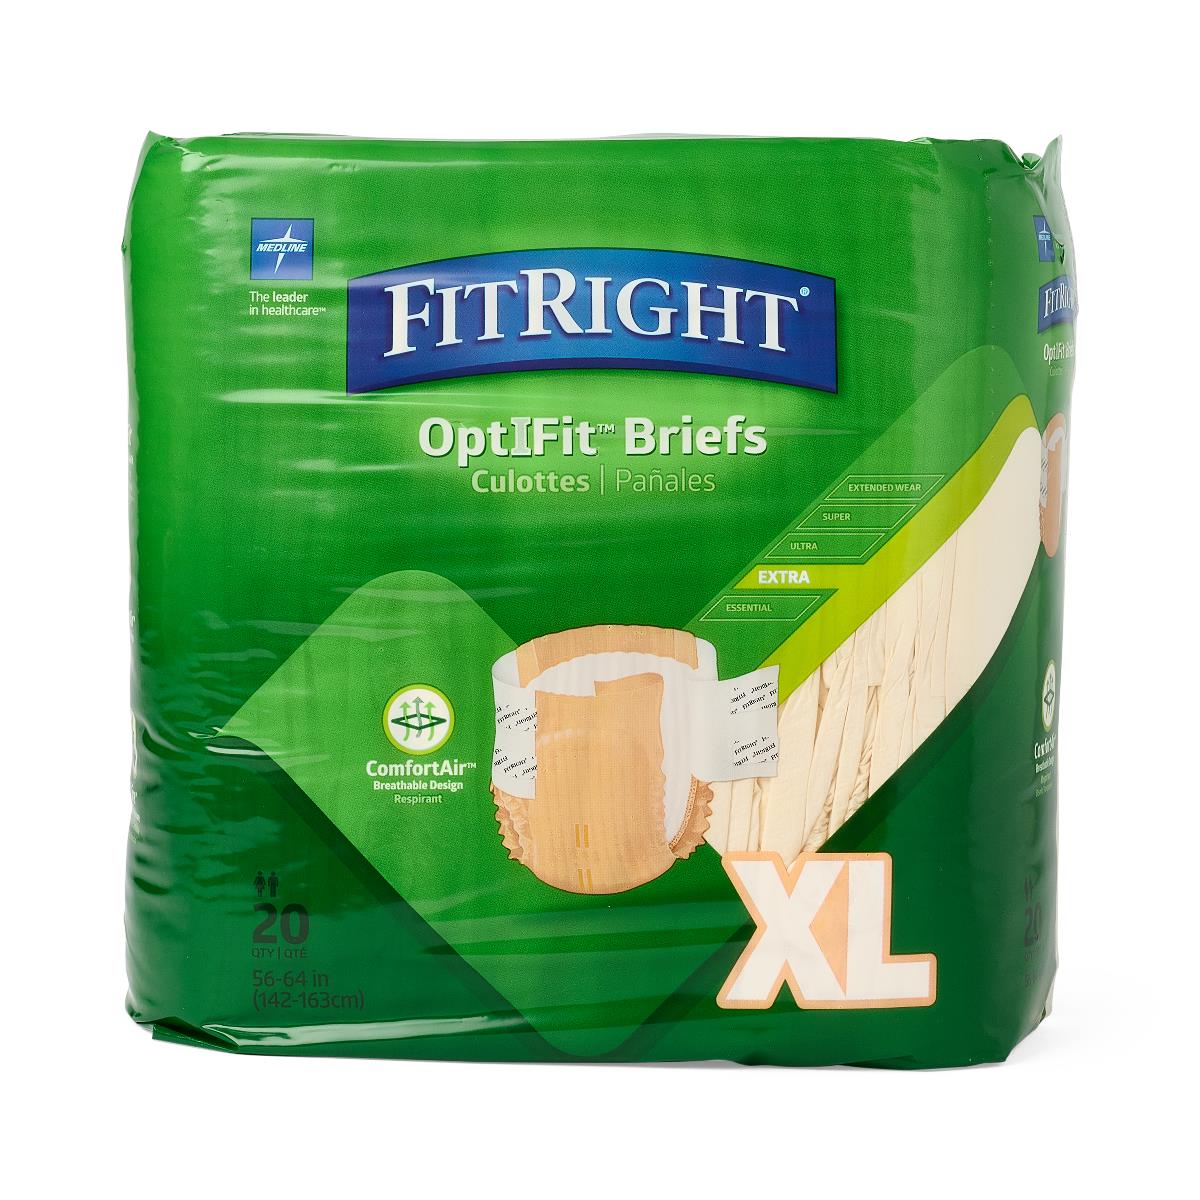 Medline FitRight OptiFit Extra Brief Size XL 56"-64", 20/pk FITEXTRAXLGZ